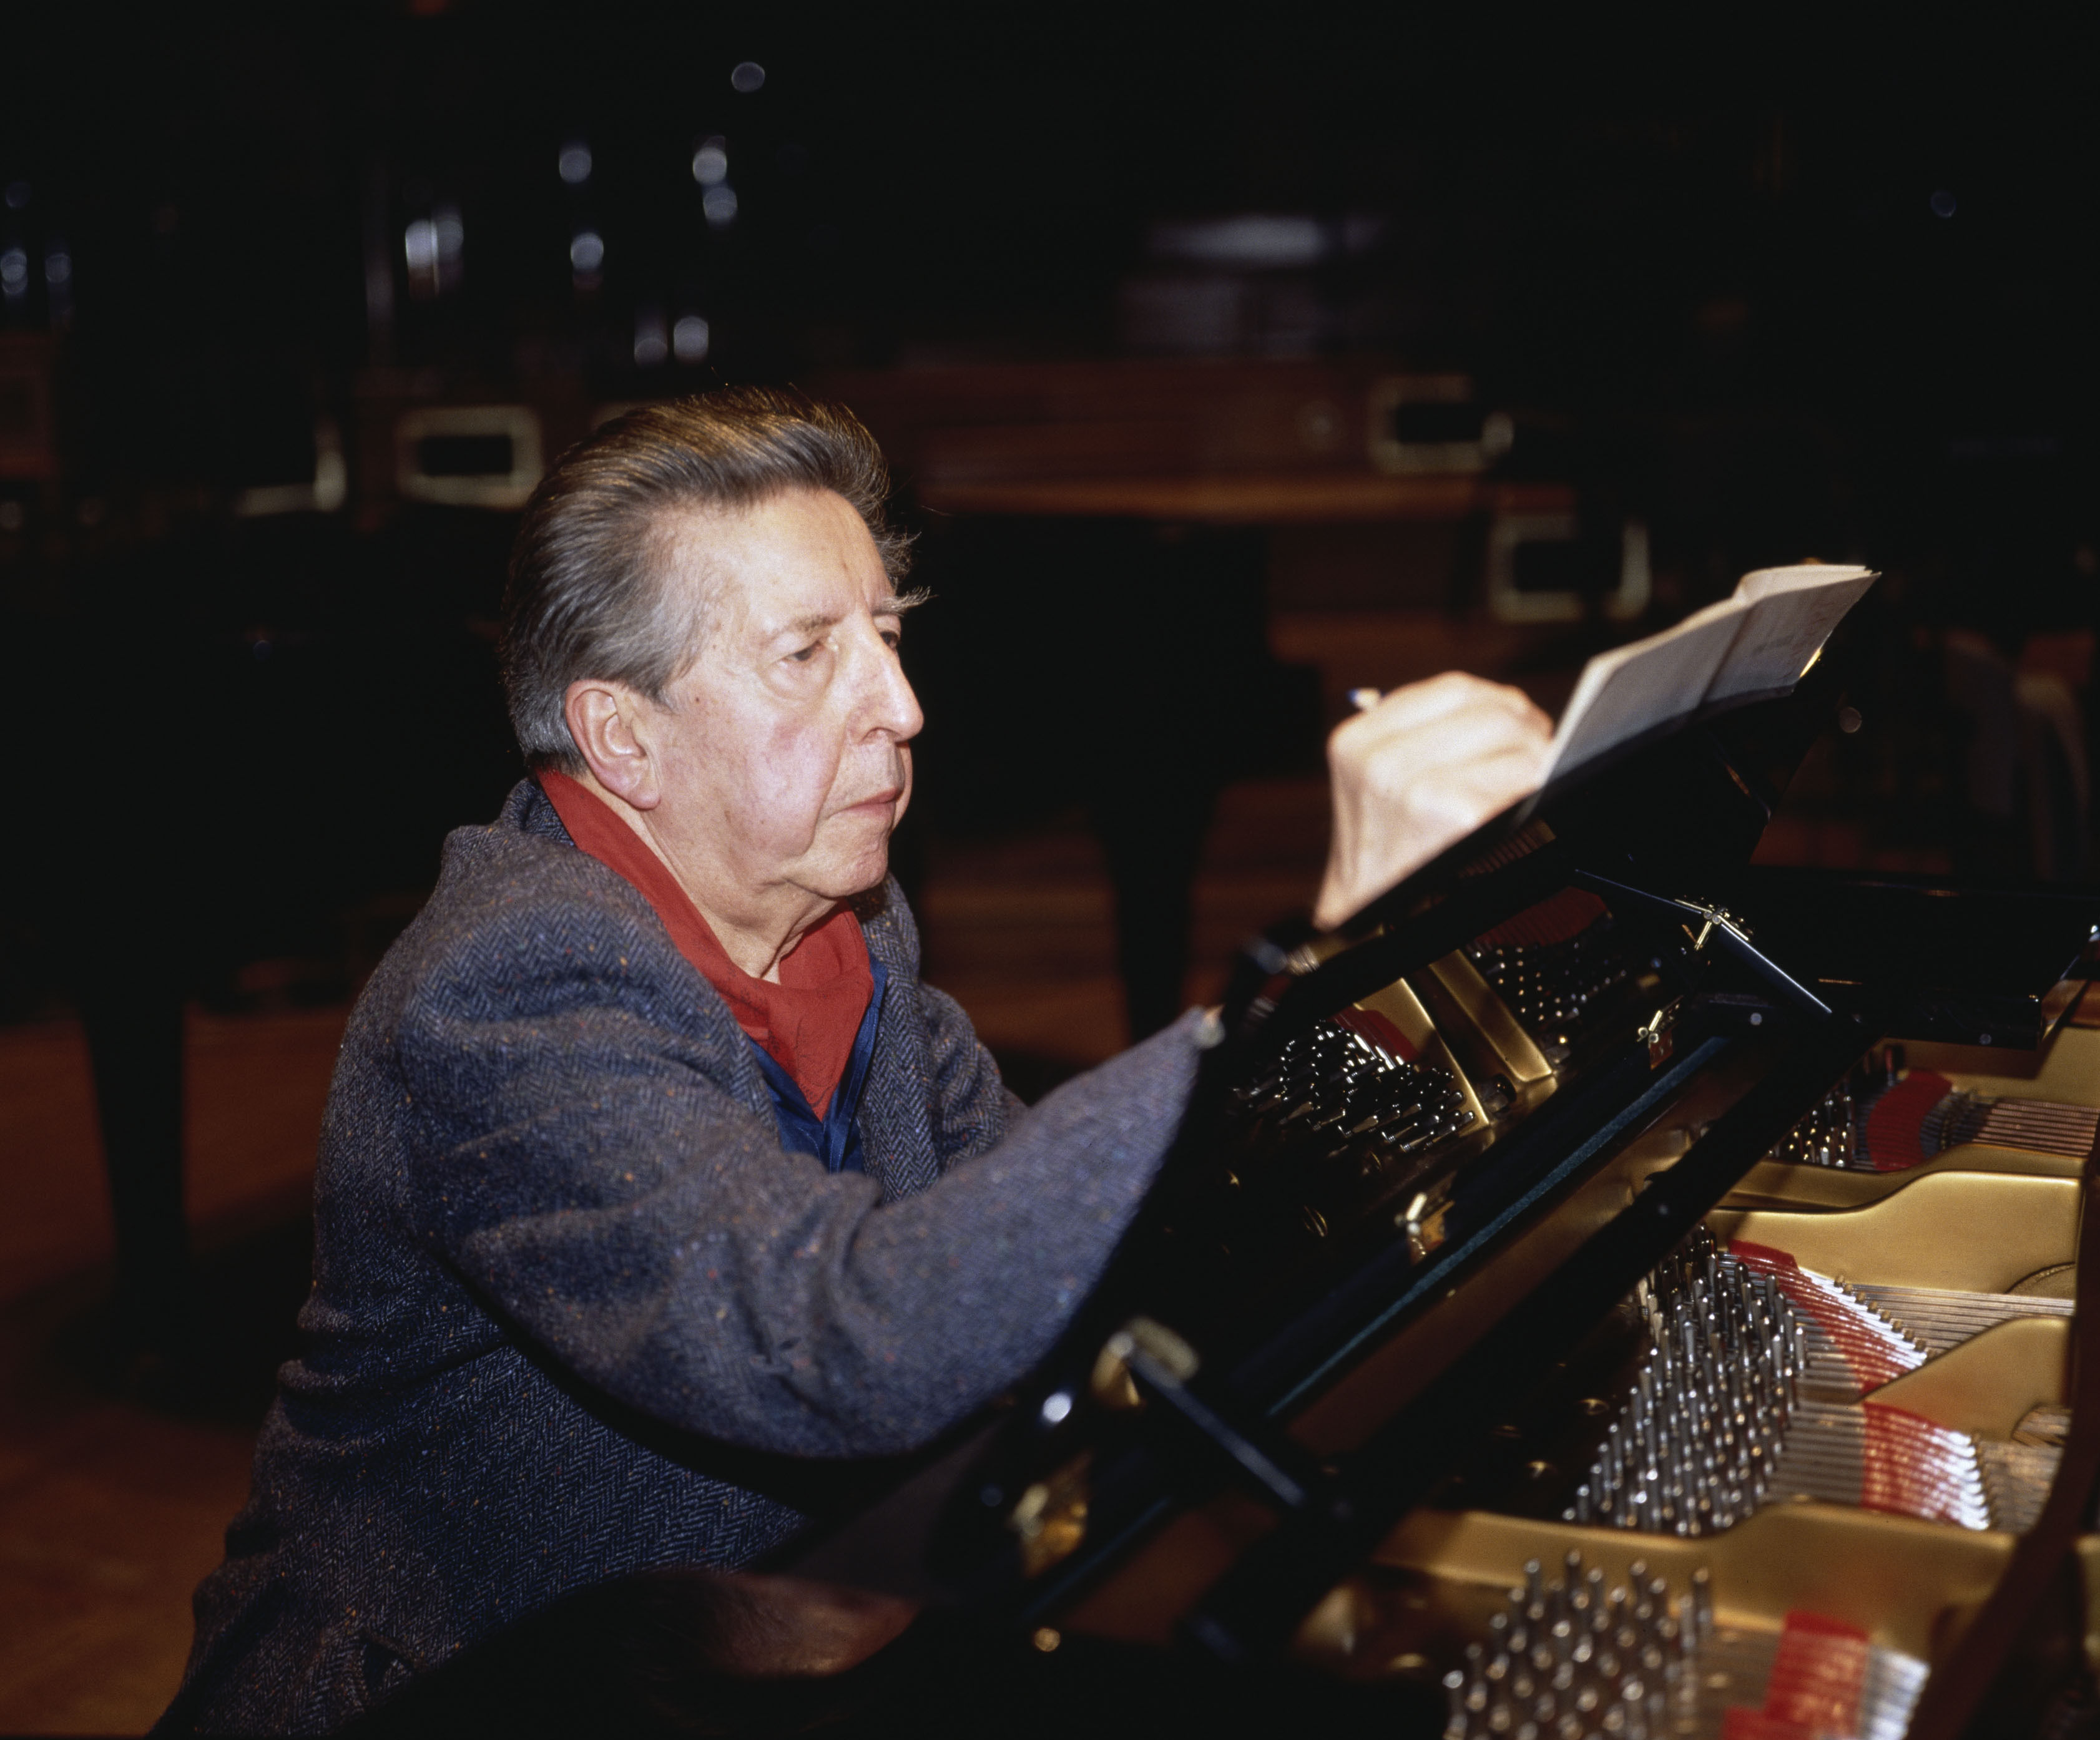 Henri Dutilleux is sitting at a piano and writing something down.